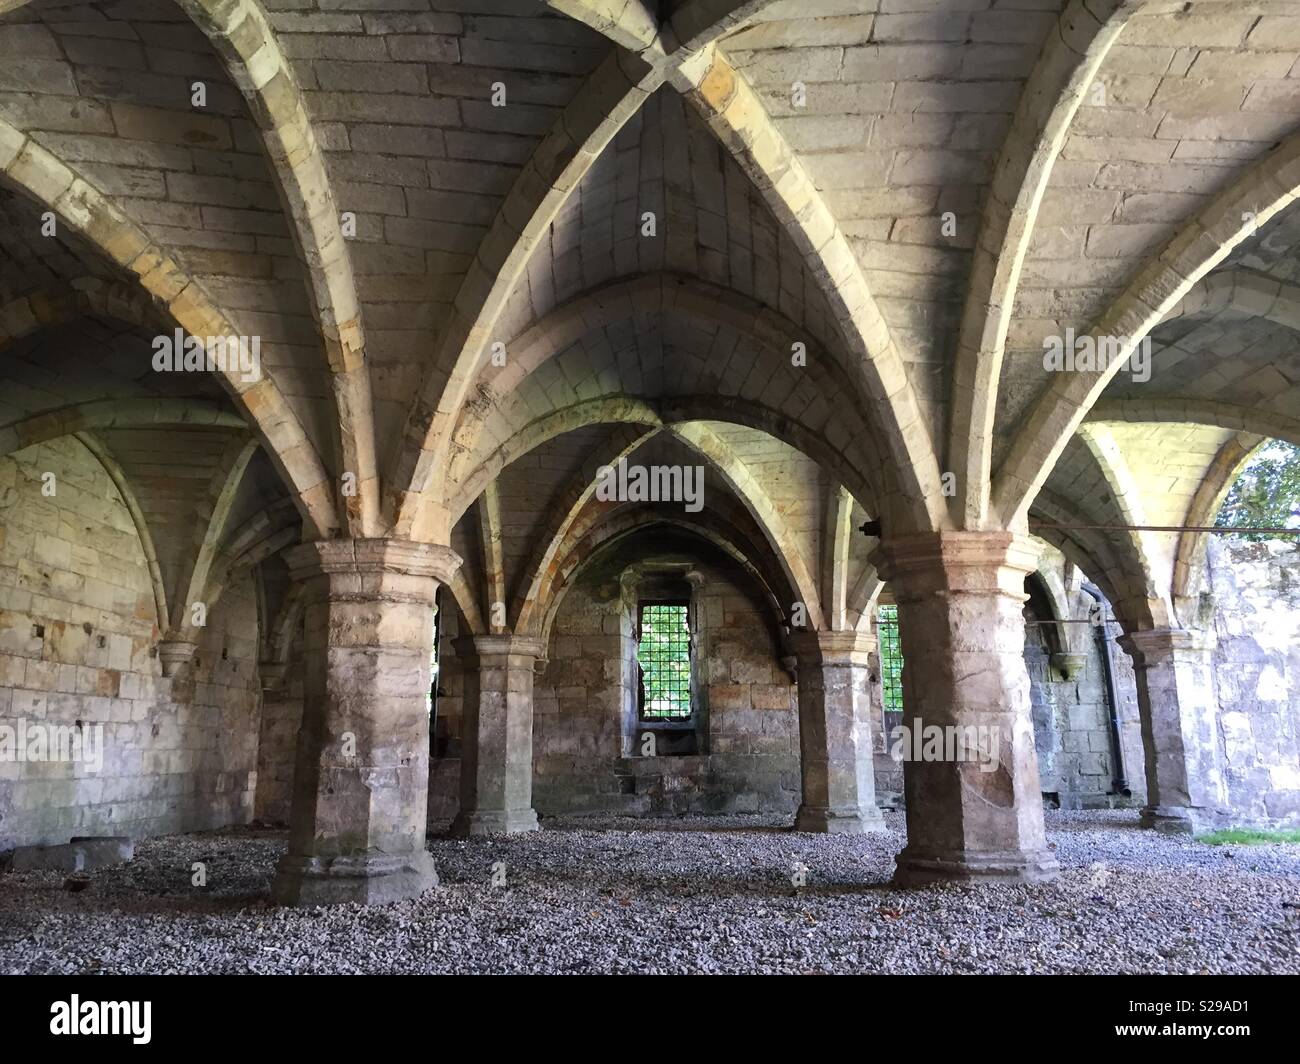 The stone pillars and arched ceiling of a derelict and run down church interior Stock Photo